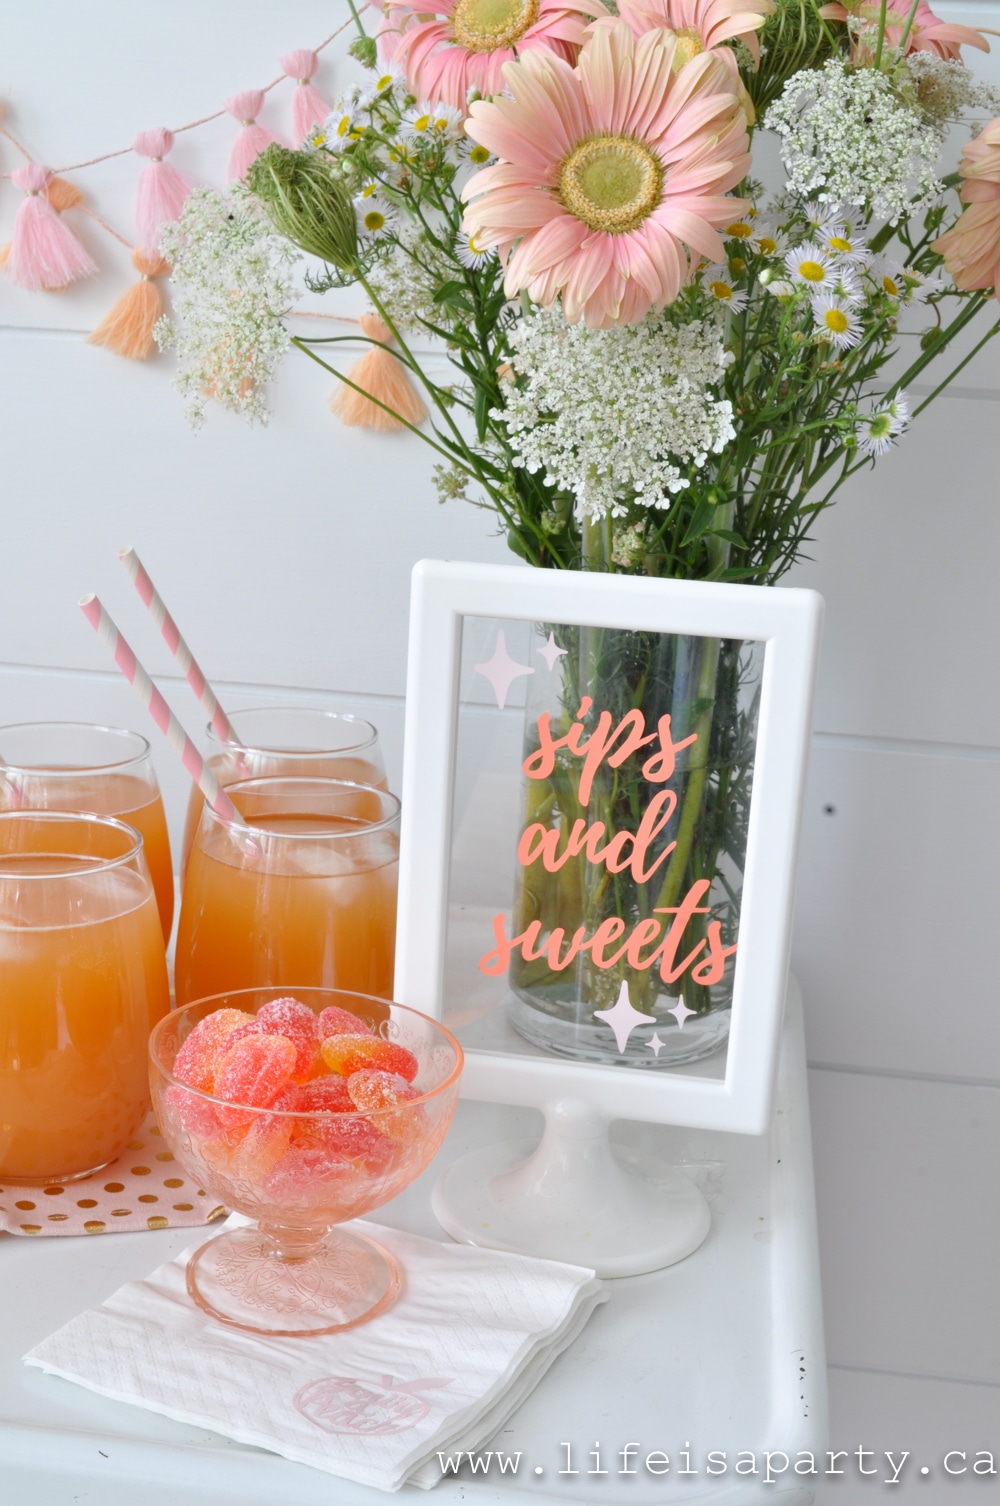 DIY acrylic sips and sweets sign